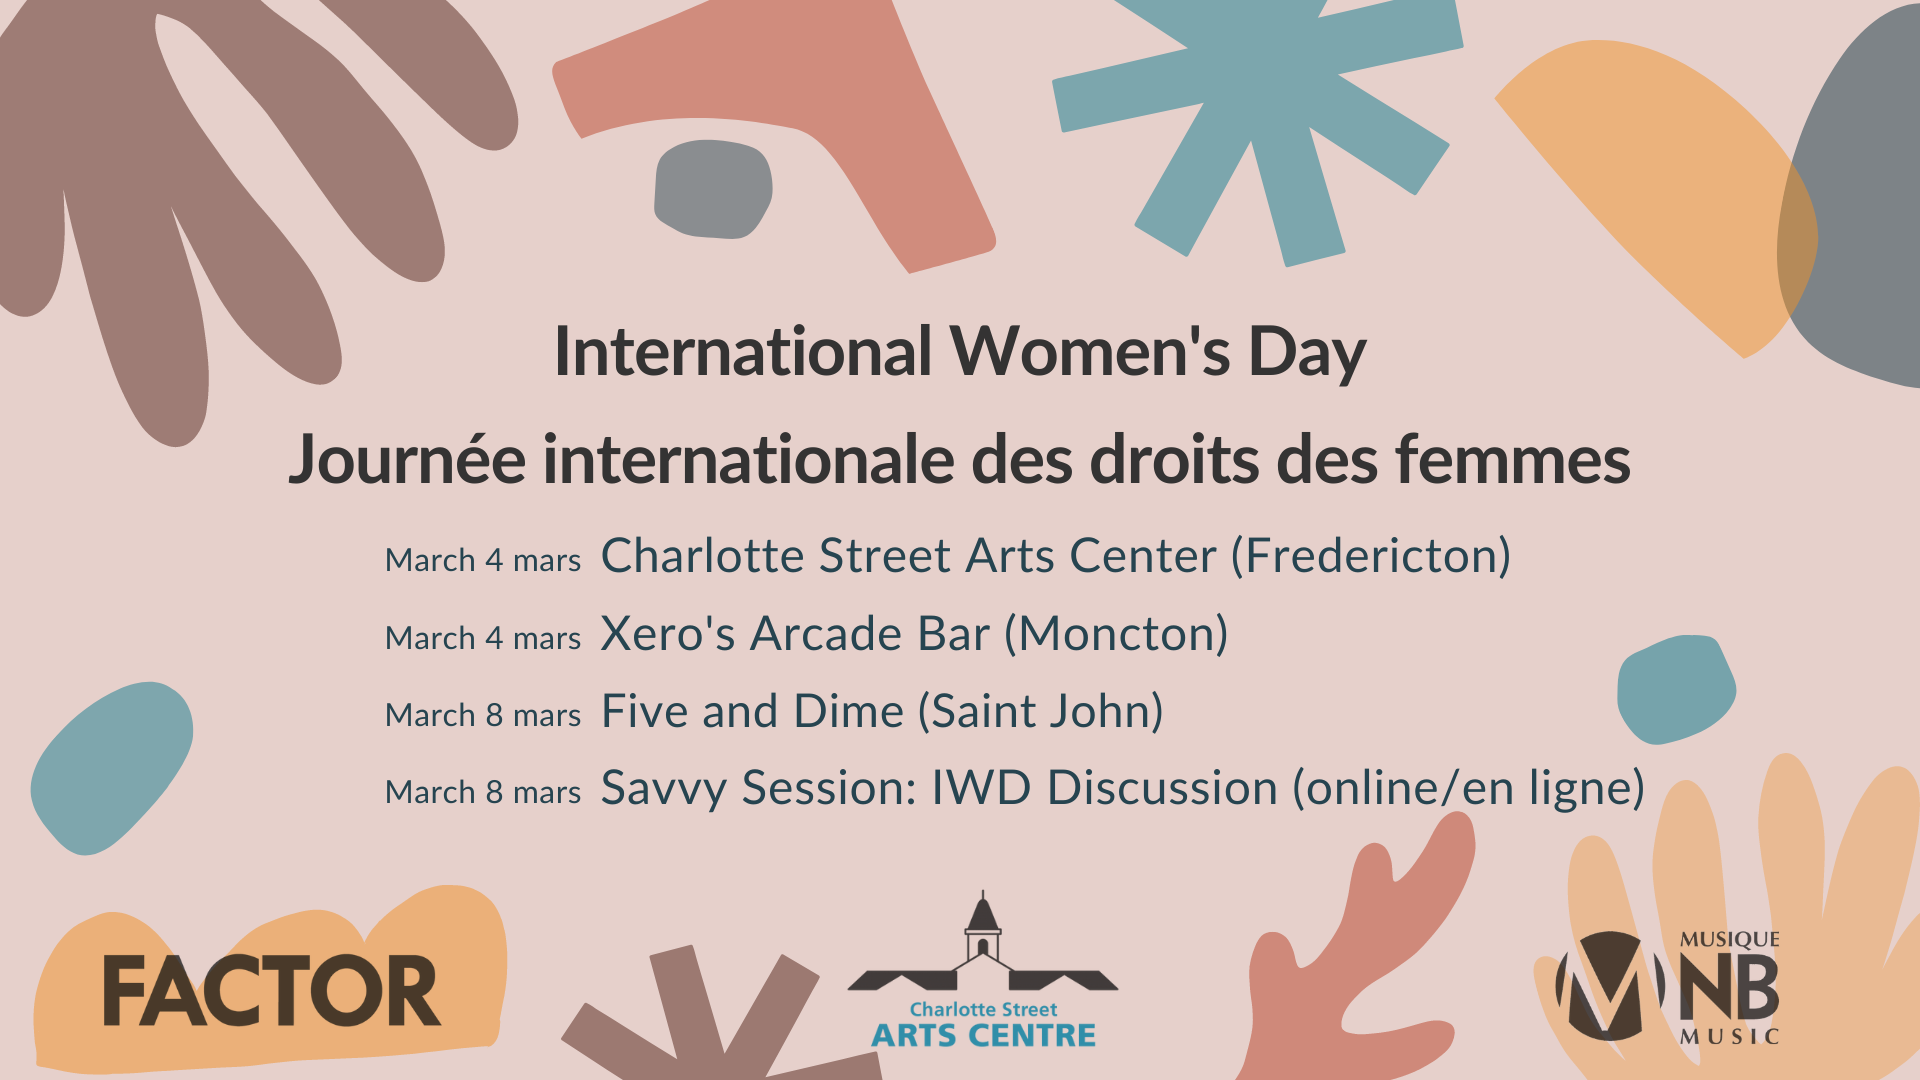 International Women's Day. March 4, Charlotte Street Arts Centre (Fredericton), March 4, Xero's Arcade Bar (Moncton), March 8, Savvy Session IWD Discussion (online)